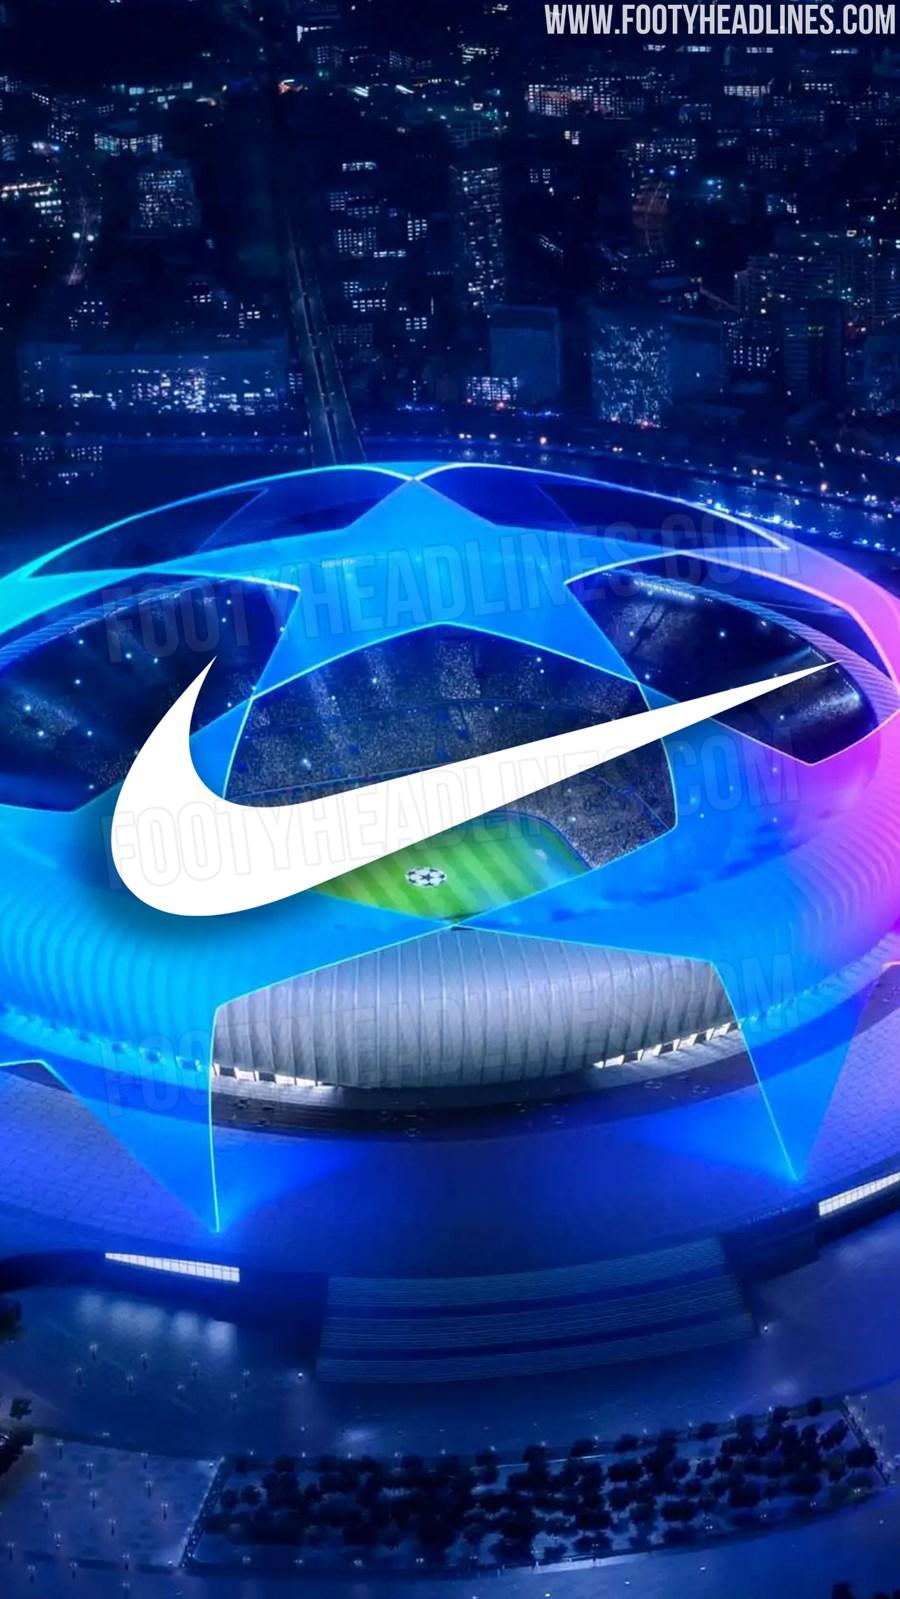 Exclusive Nike To Release Special Boot Collection For Champions